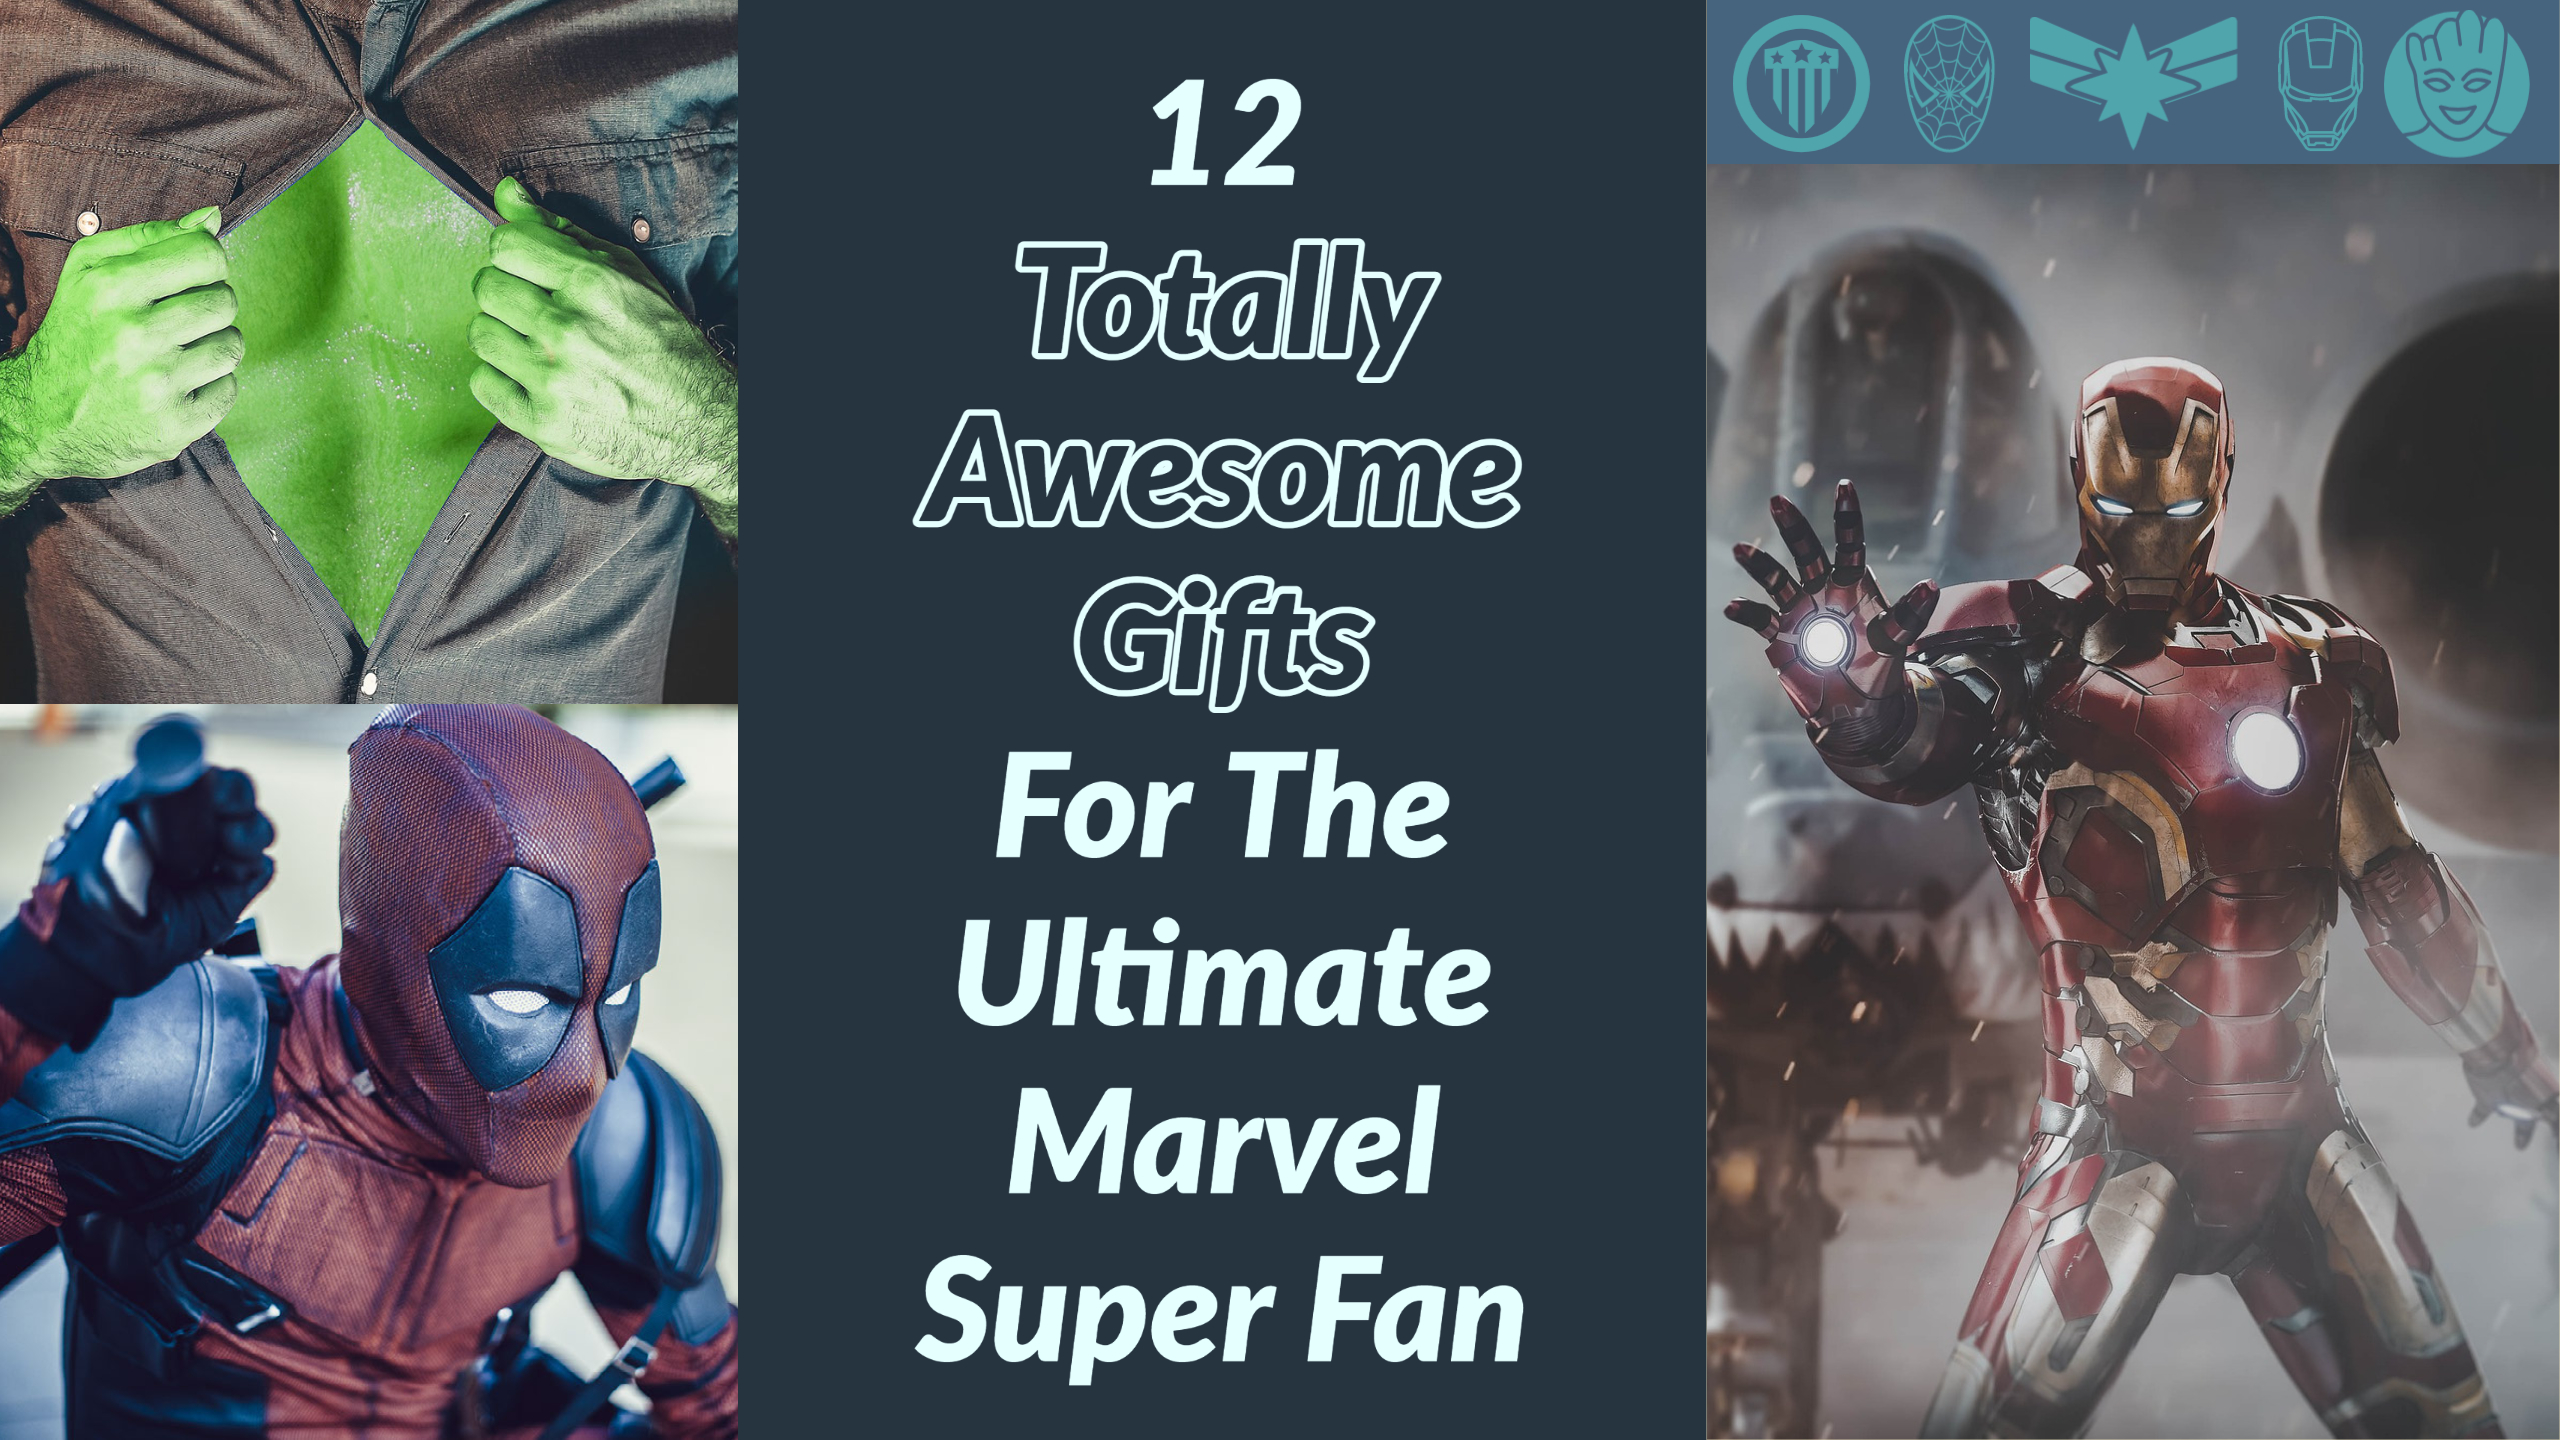 Totally Awesome Gifts For The Ultimate Marvel Super Fan Header